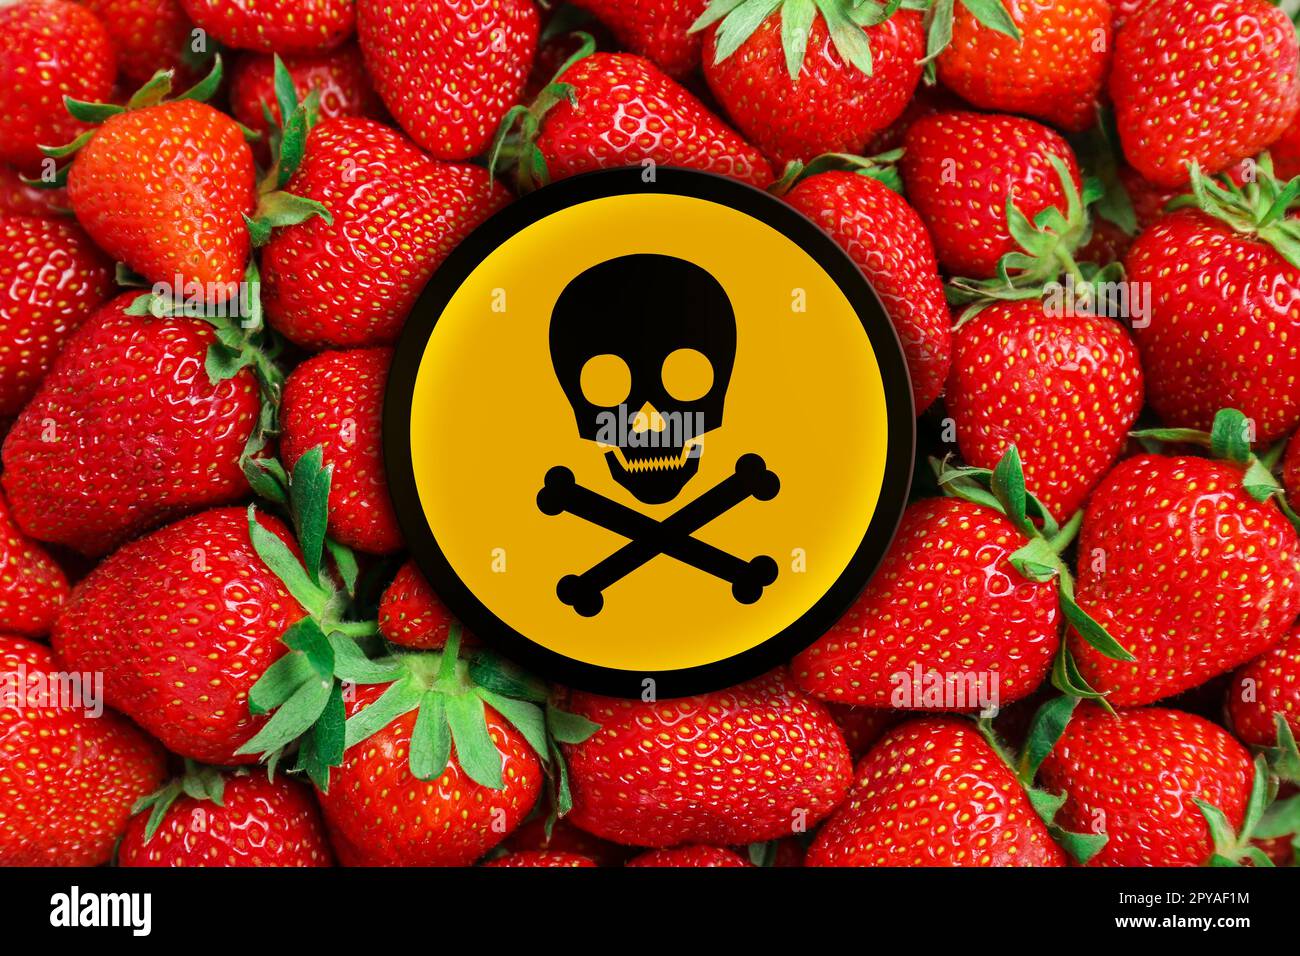 Skull and crossbones sign on ripe strawberries, closeup. Be careful - toxic Stock Photo